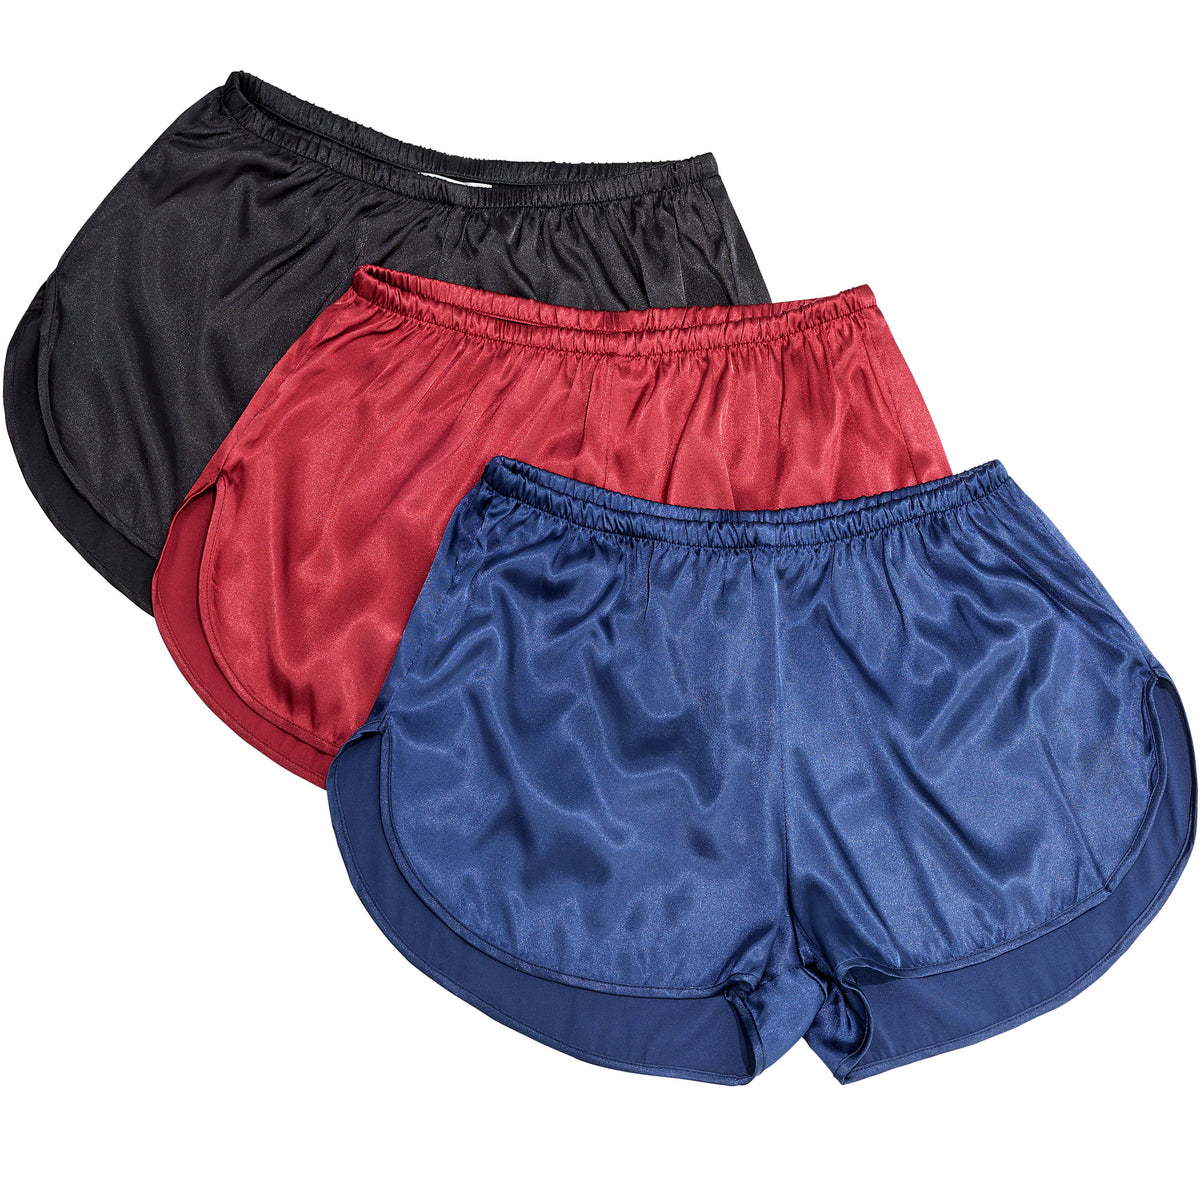 ADR Lady Boxers with Pockets, Pack of 3 Women's Satin Boxers with  Drawstring, Sleep Shorts Dusty Pink, Dusty Blue, Twilight Large